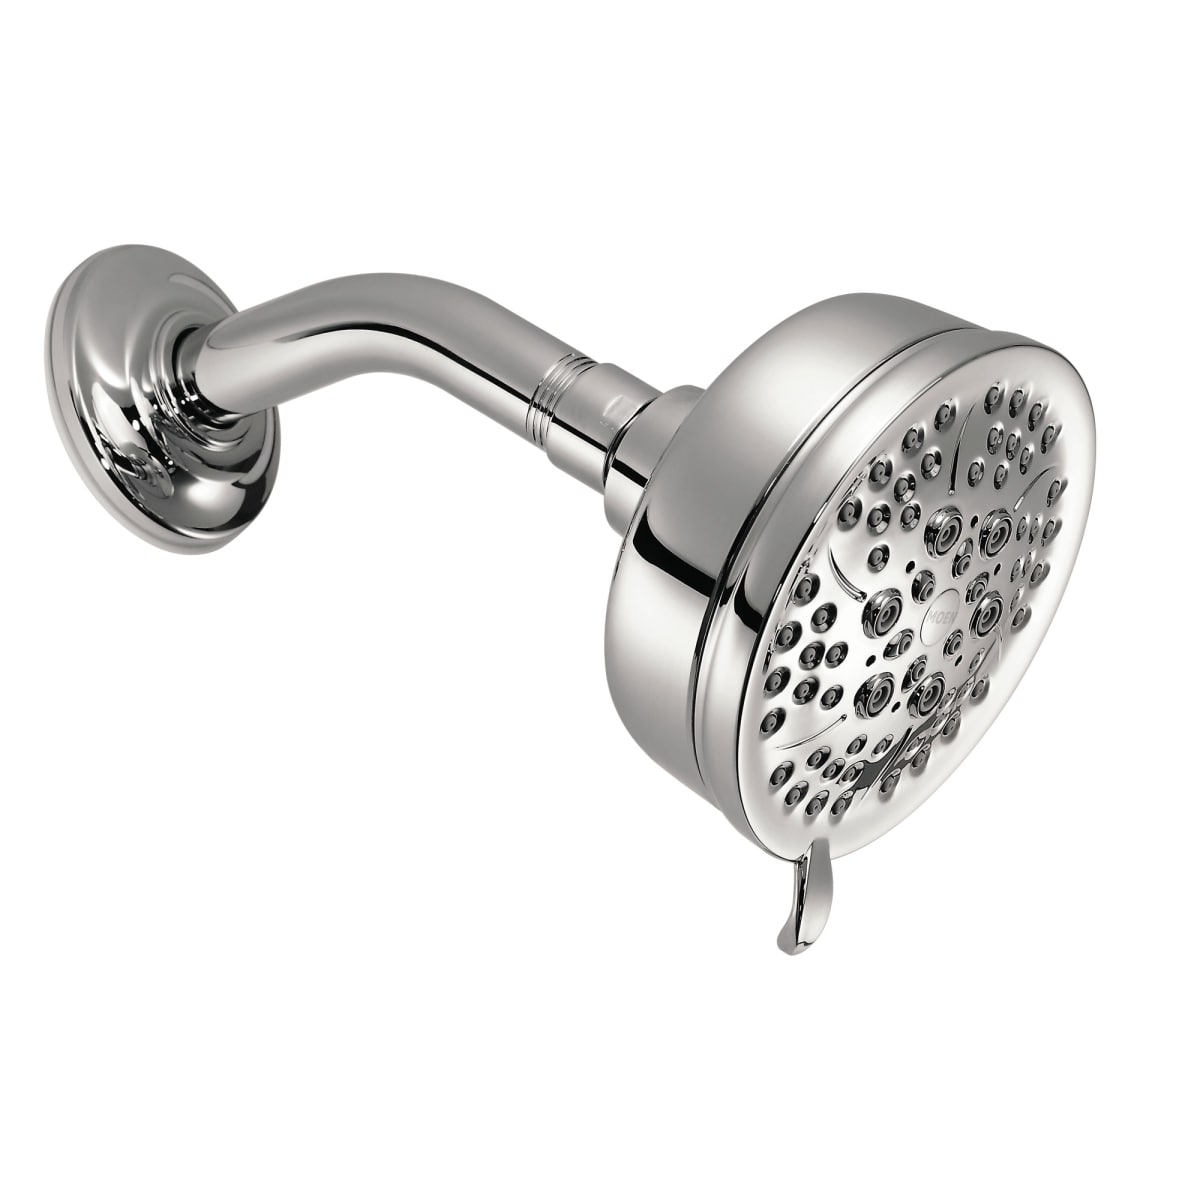 Moen 24066 Chrome 2 Gpm Multi Function Shower Head From The